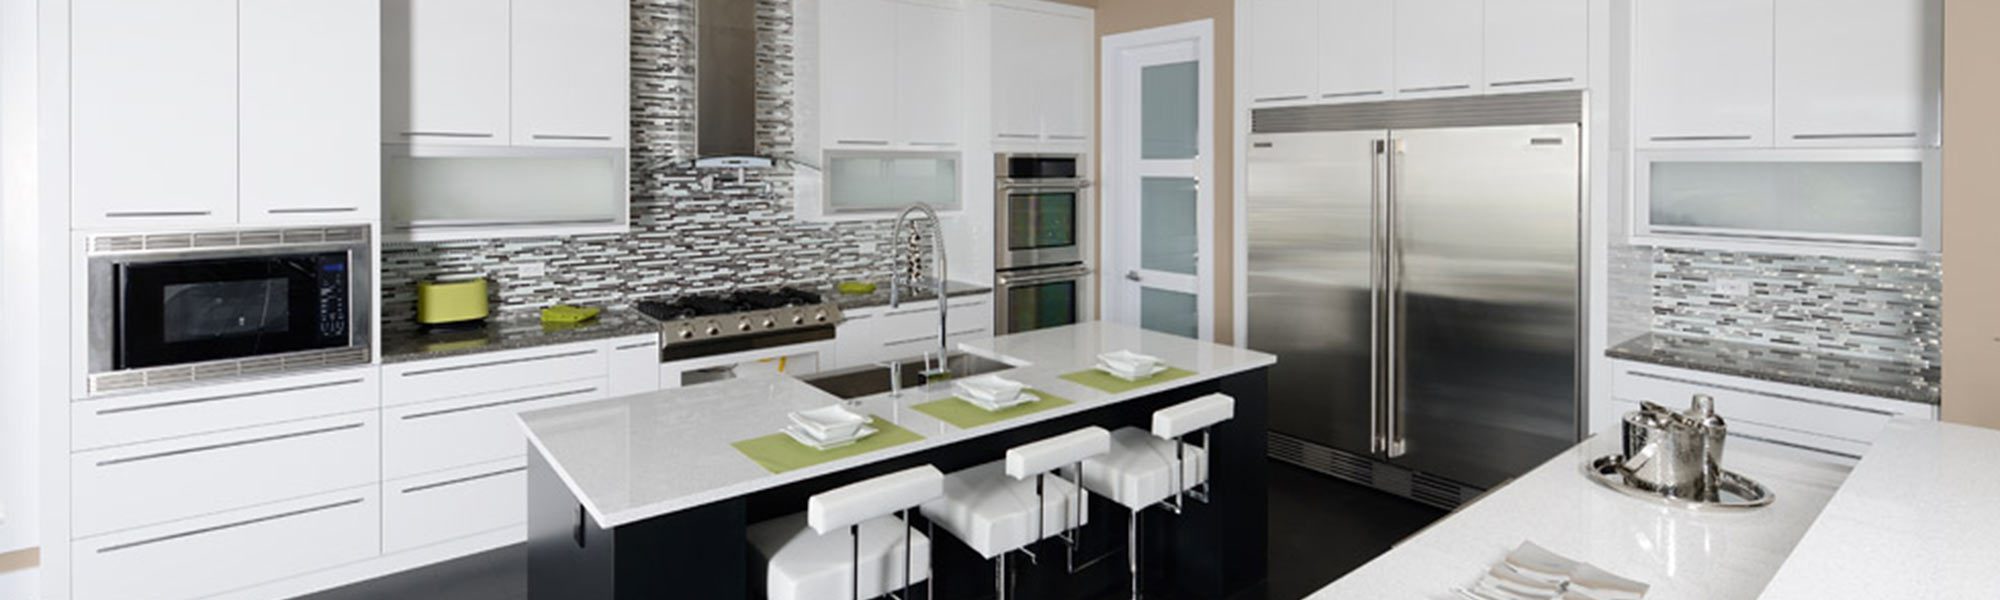 Remodeled Kitchen in Venice, FL | Design and Remodeling Solutions